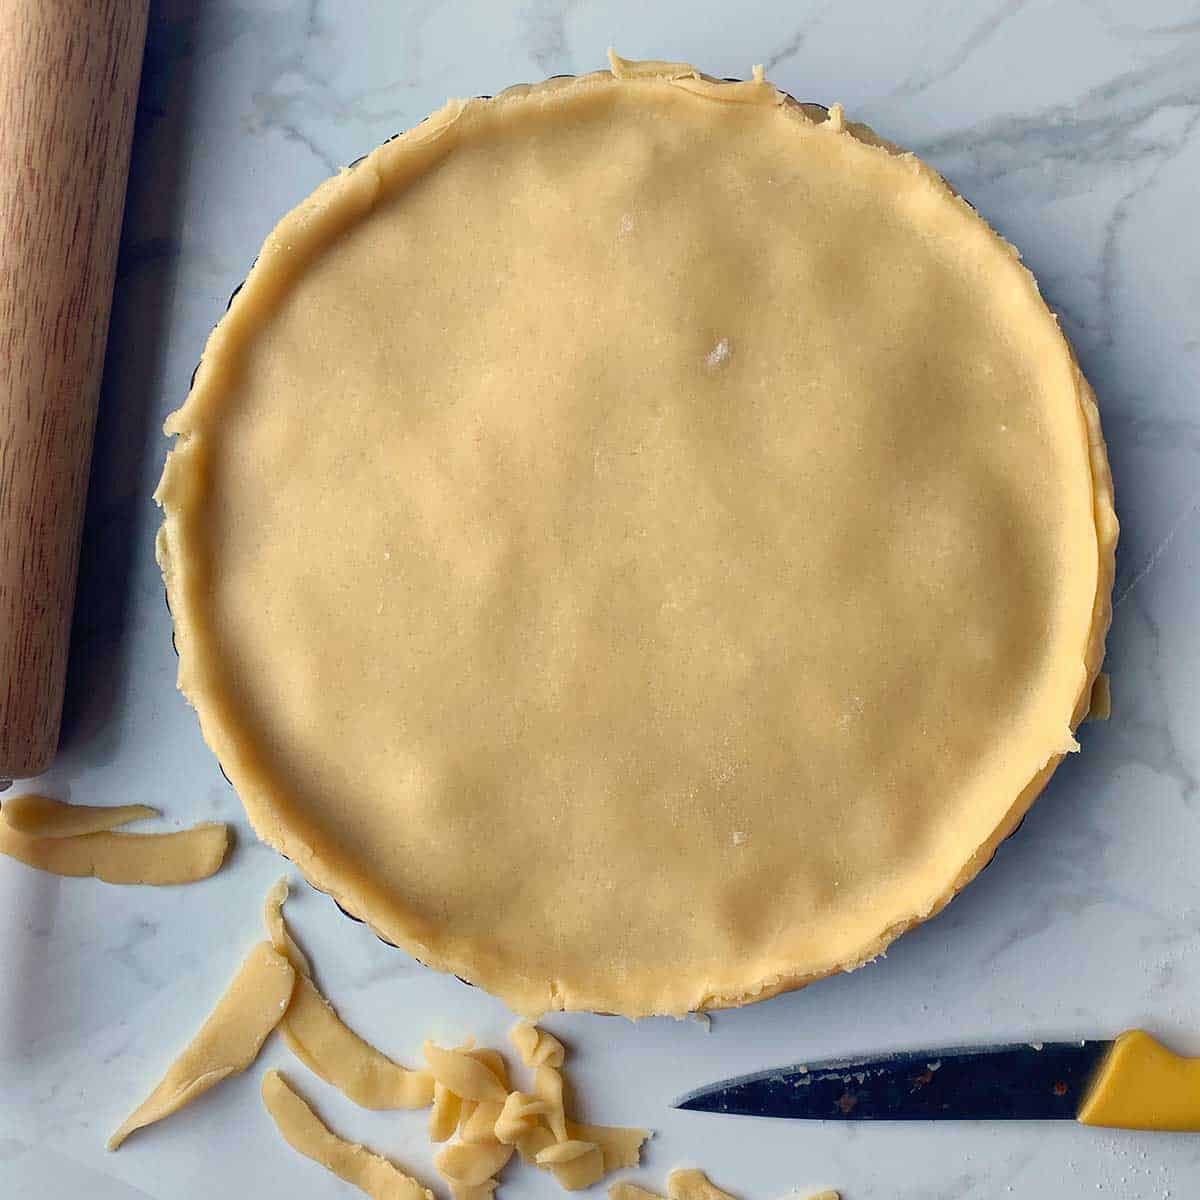 A pie with a shortcrust topping having just been trimmed of excess pastry.